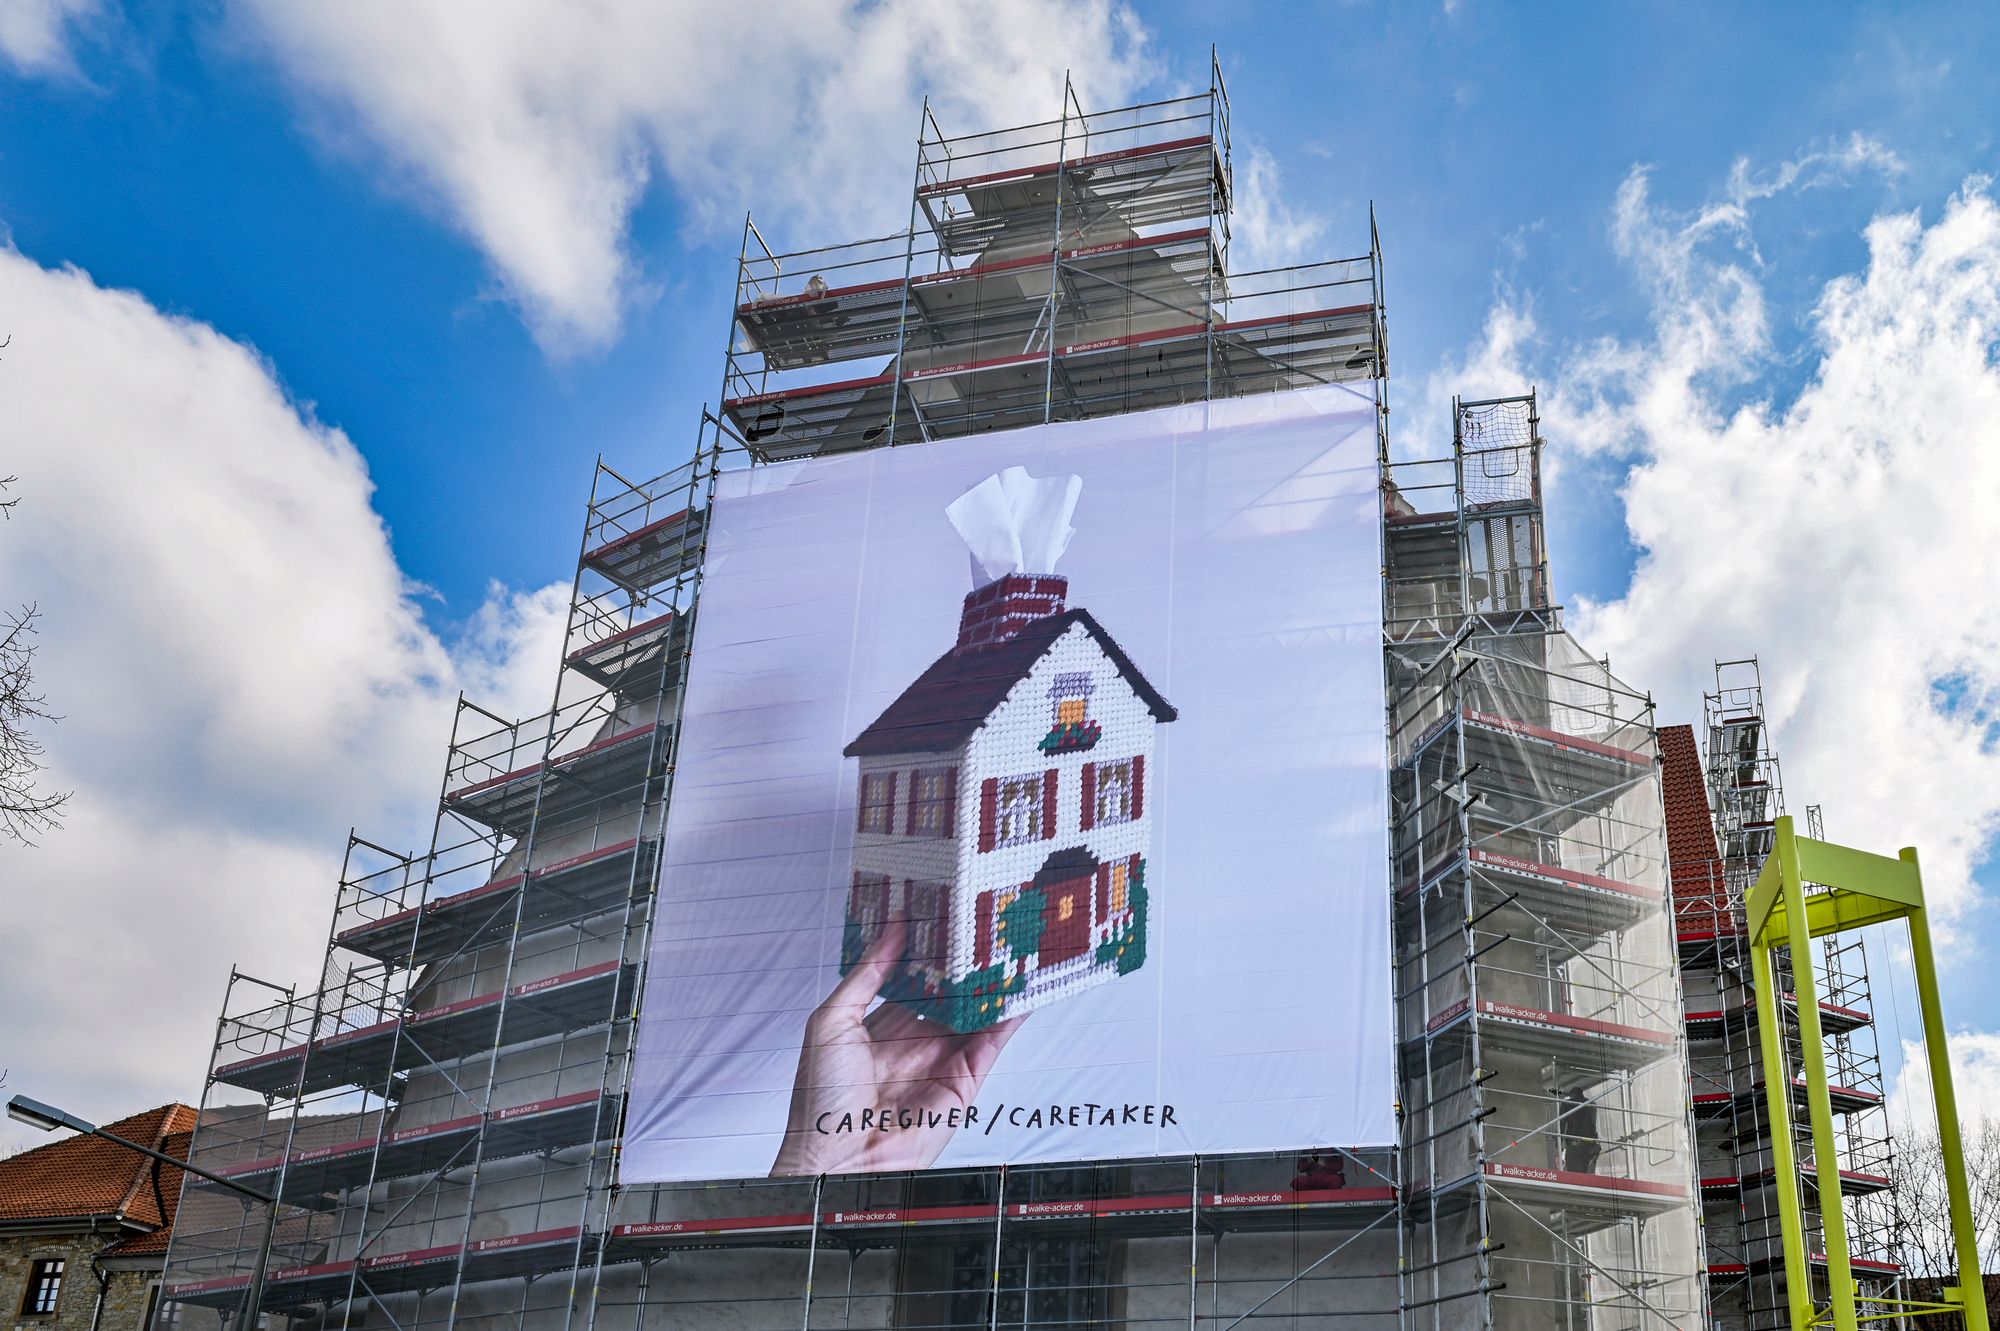 Billboard with white person's hand holding a crocheted house tissue box with the words "Caretaker/Caregiver" on the side of scaffolding. 